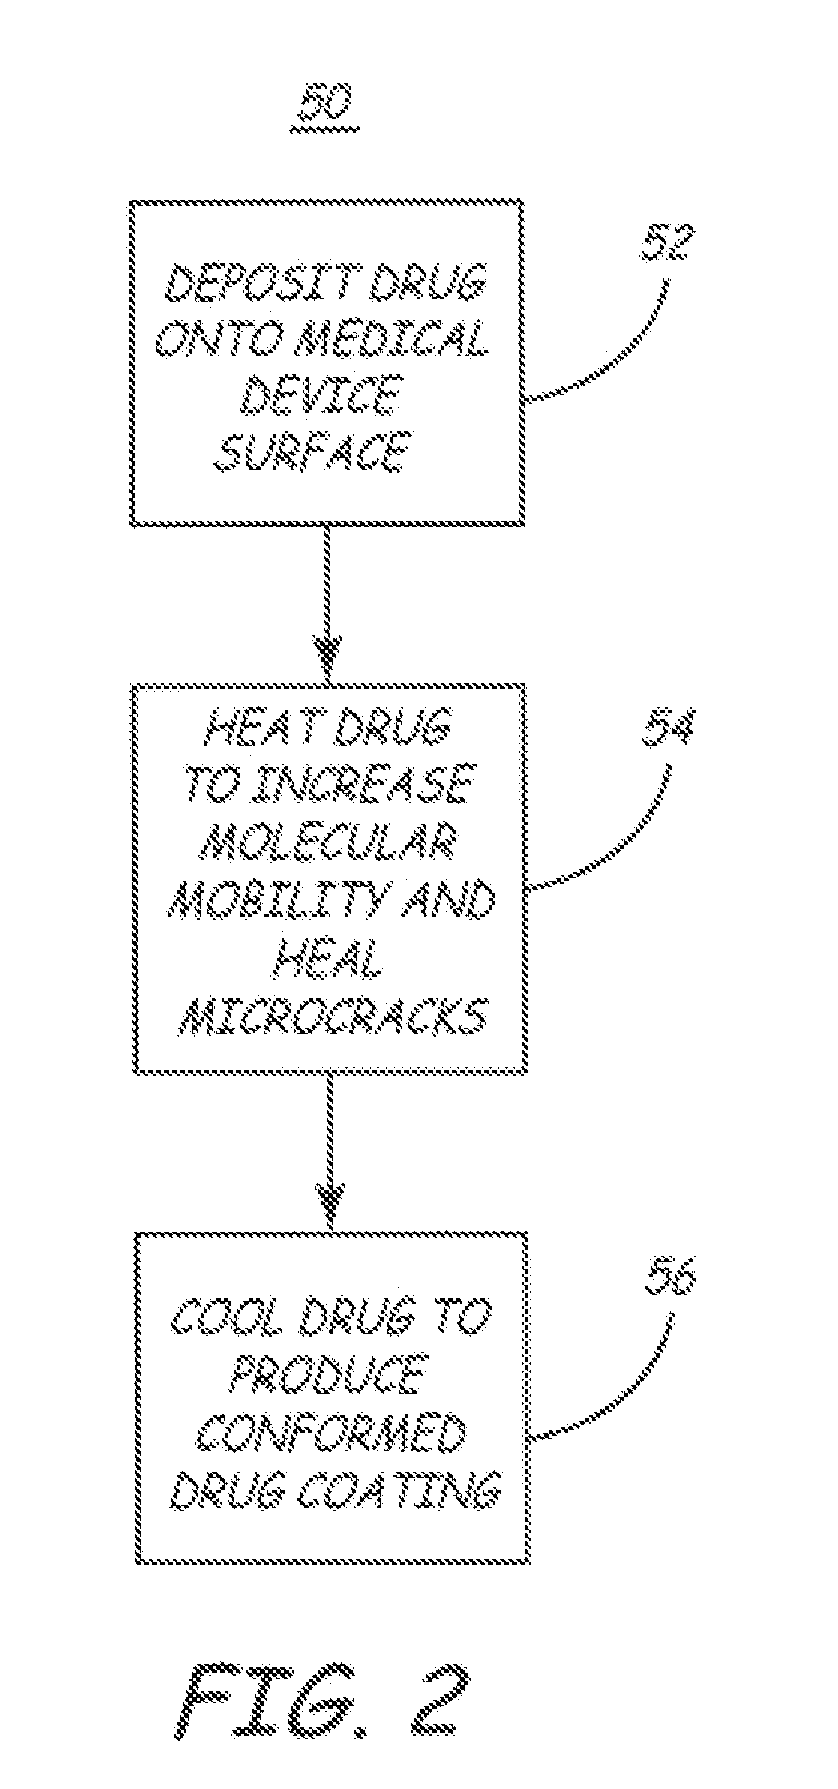 Method for applying a drug coating to a medical device